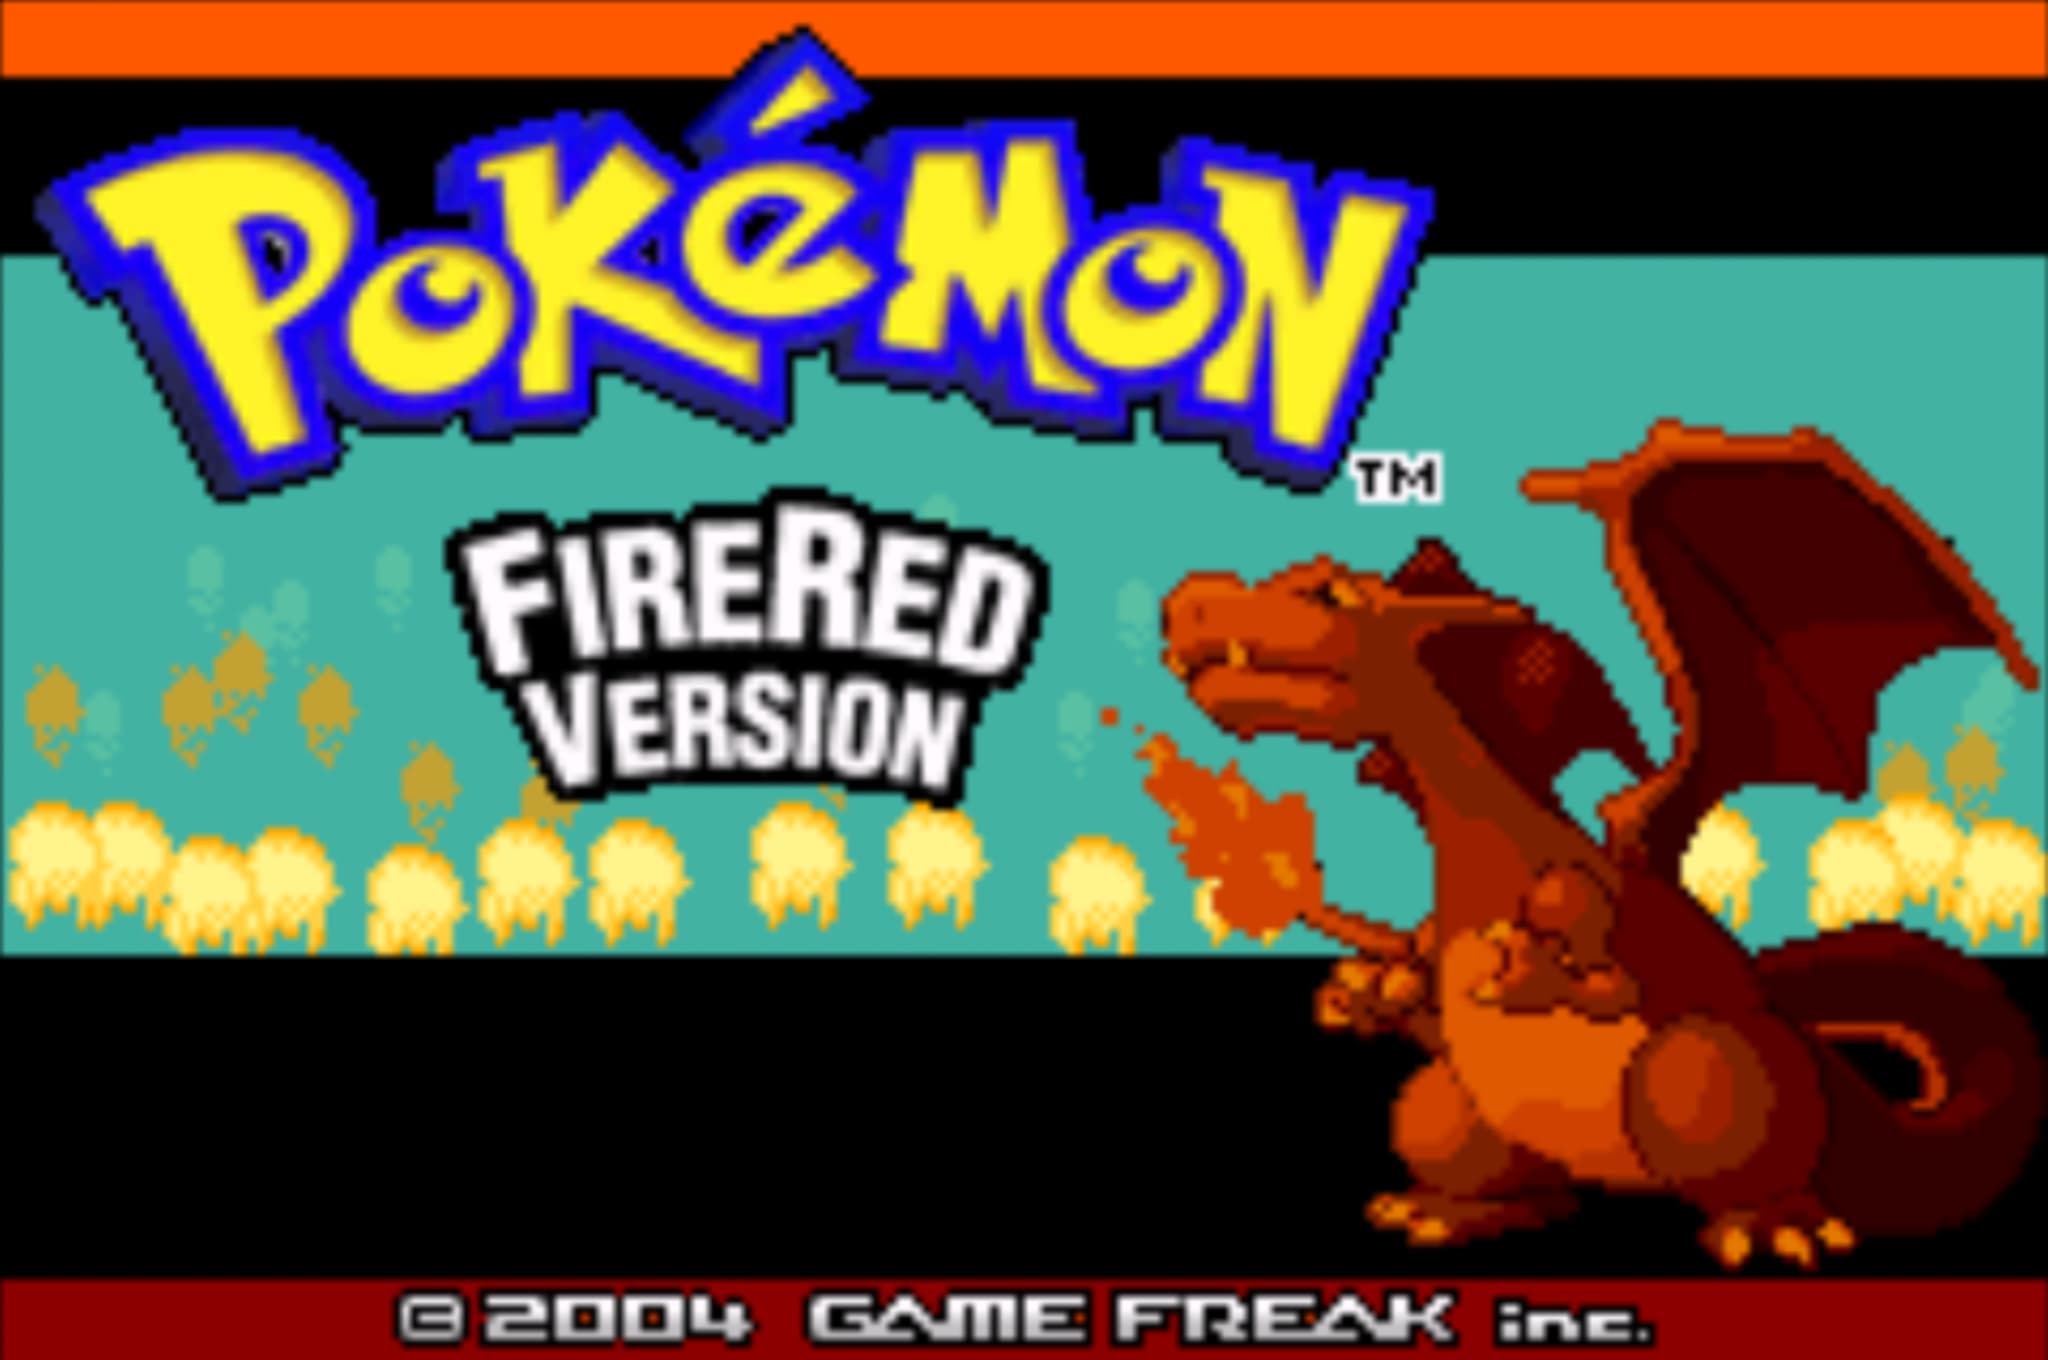 How to get Mega Kick and Mega Punch in Pokemon FireRed 